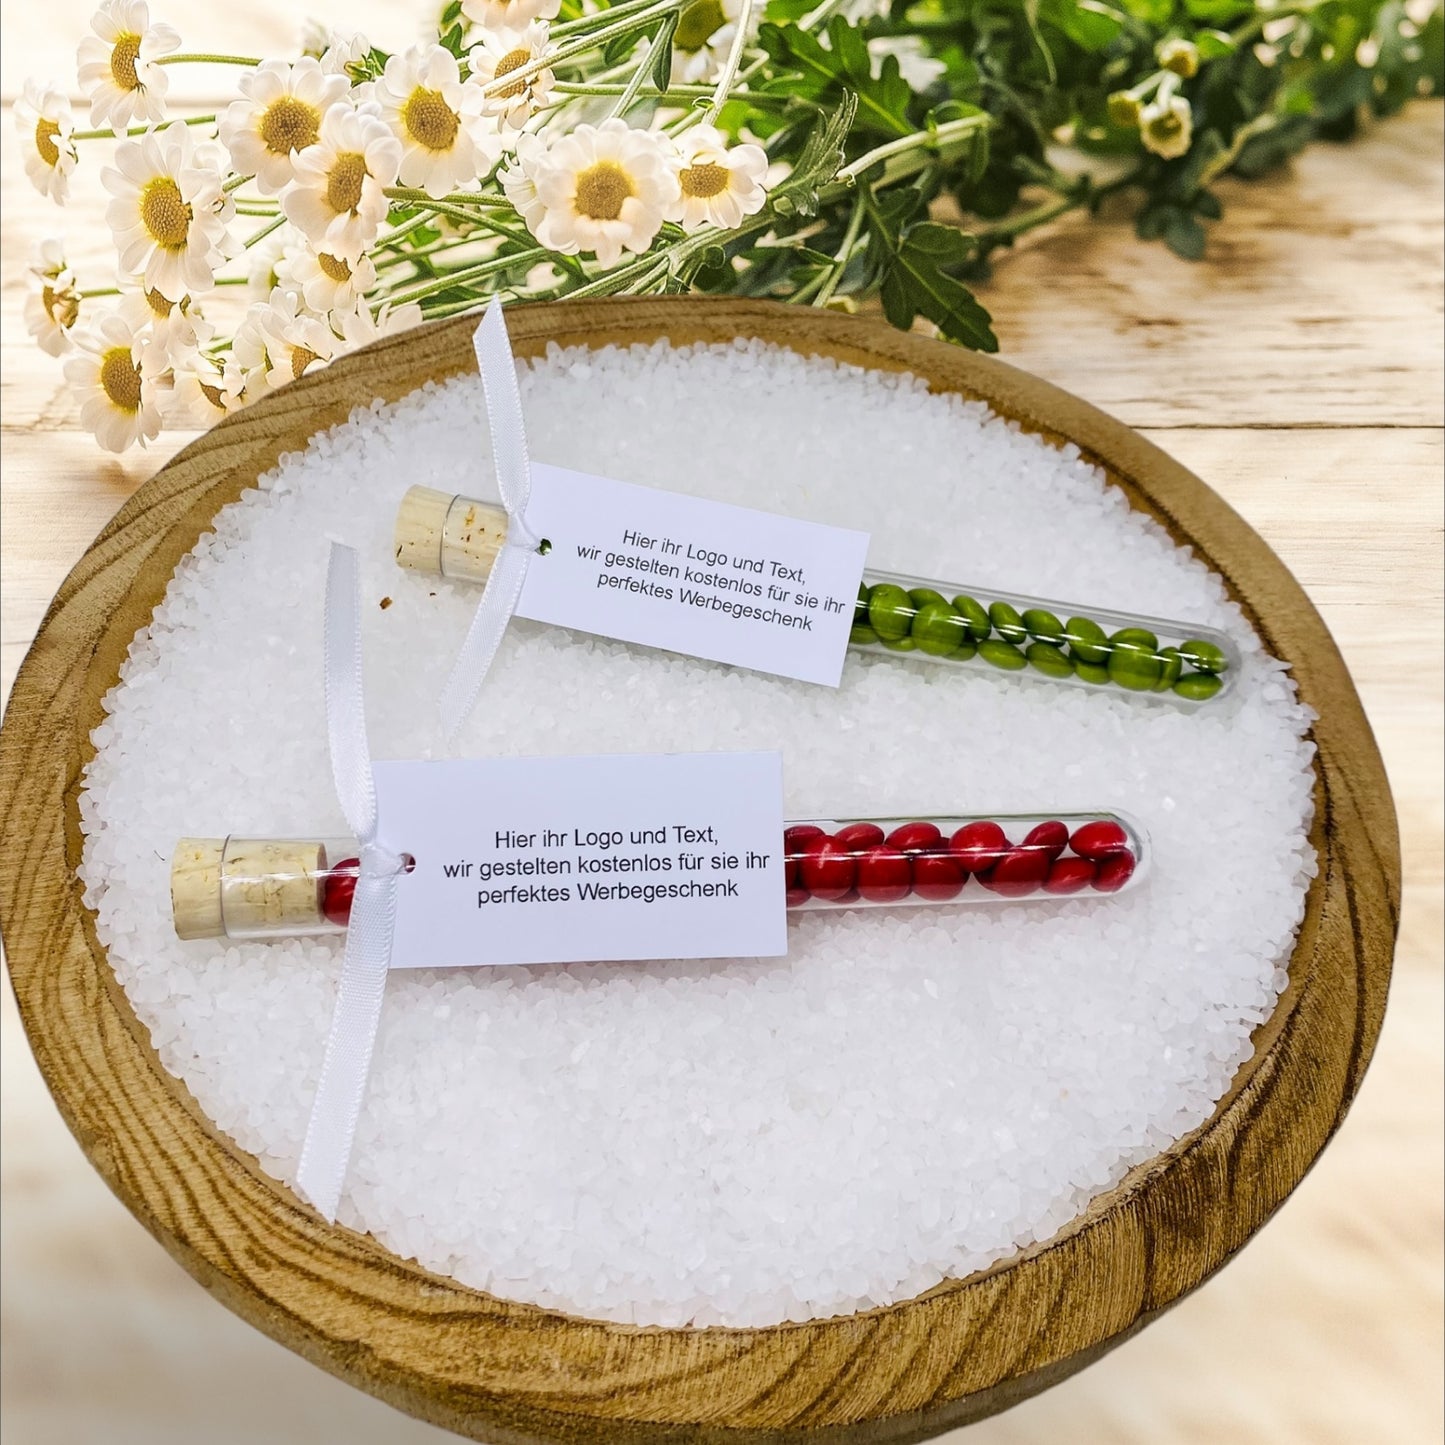 Copy of Promotional Gifts with Style Square Pendant: Personalized test tubes for lasting impressions!